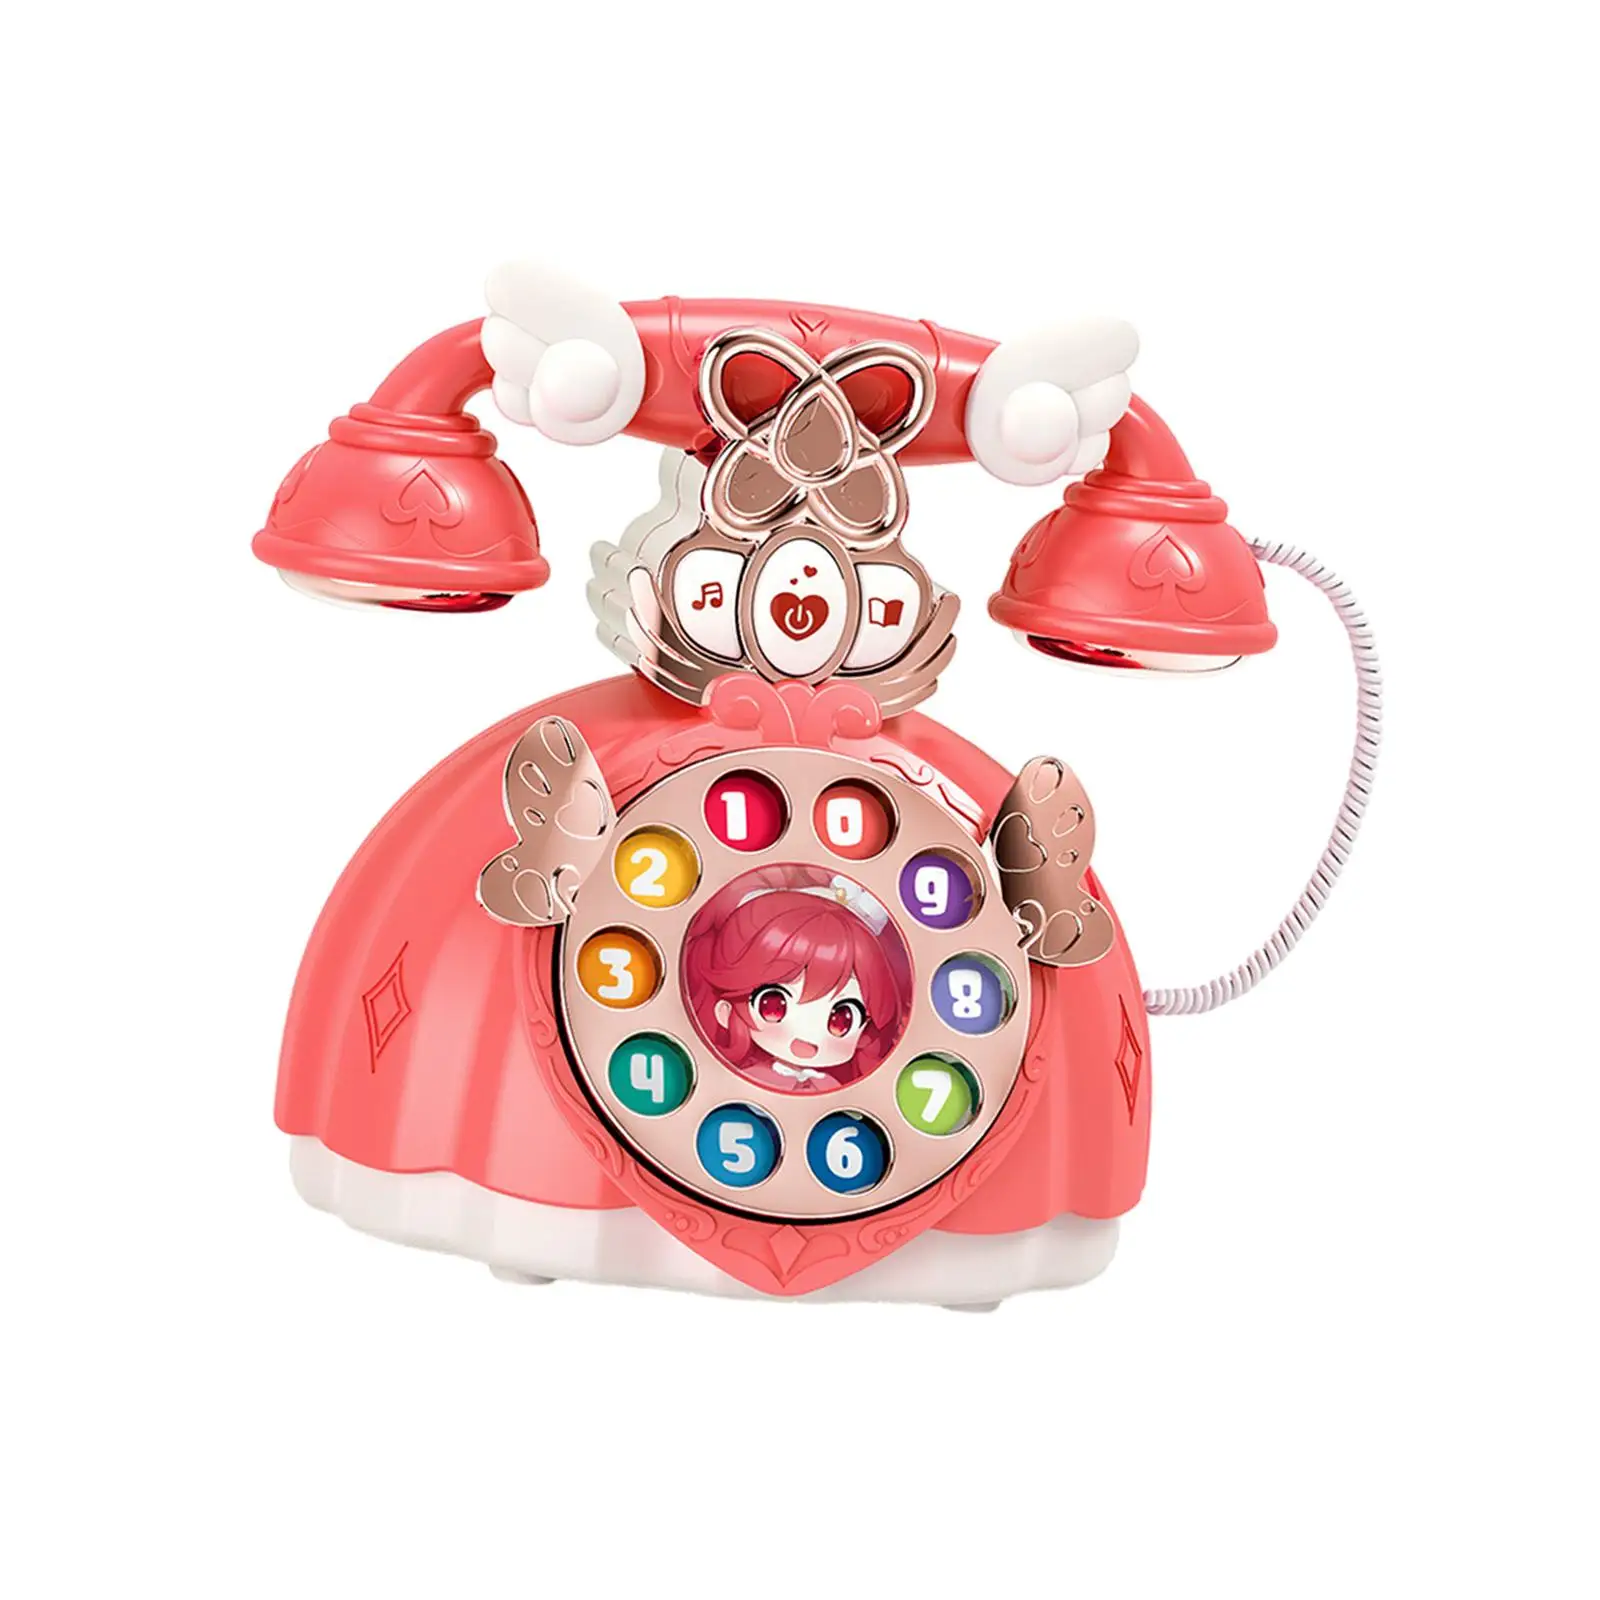 Baby Phone Toy with Music, Story and Lights Pretend Play for Children